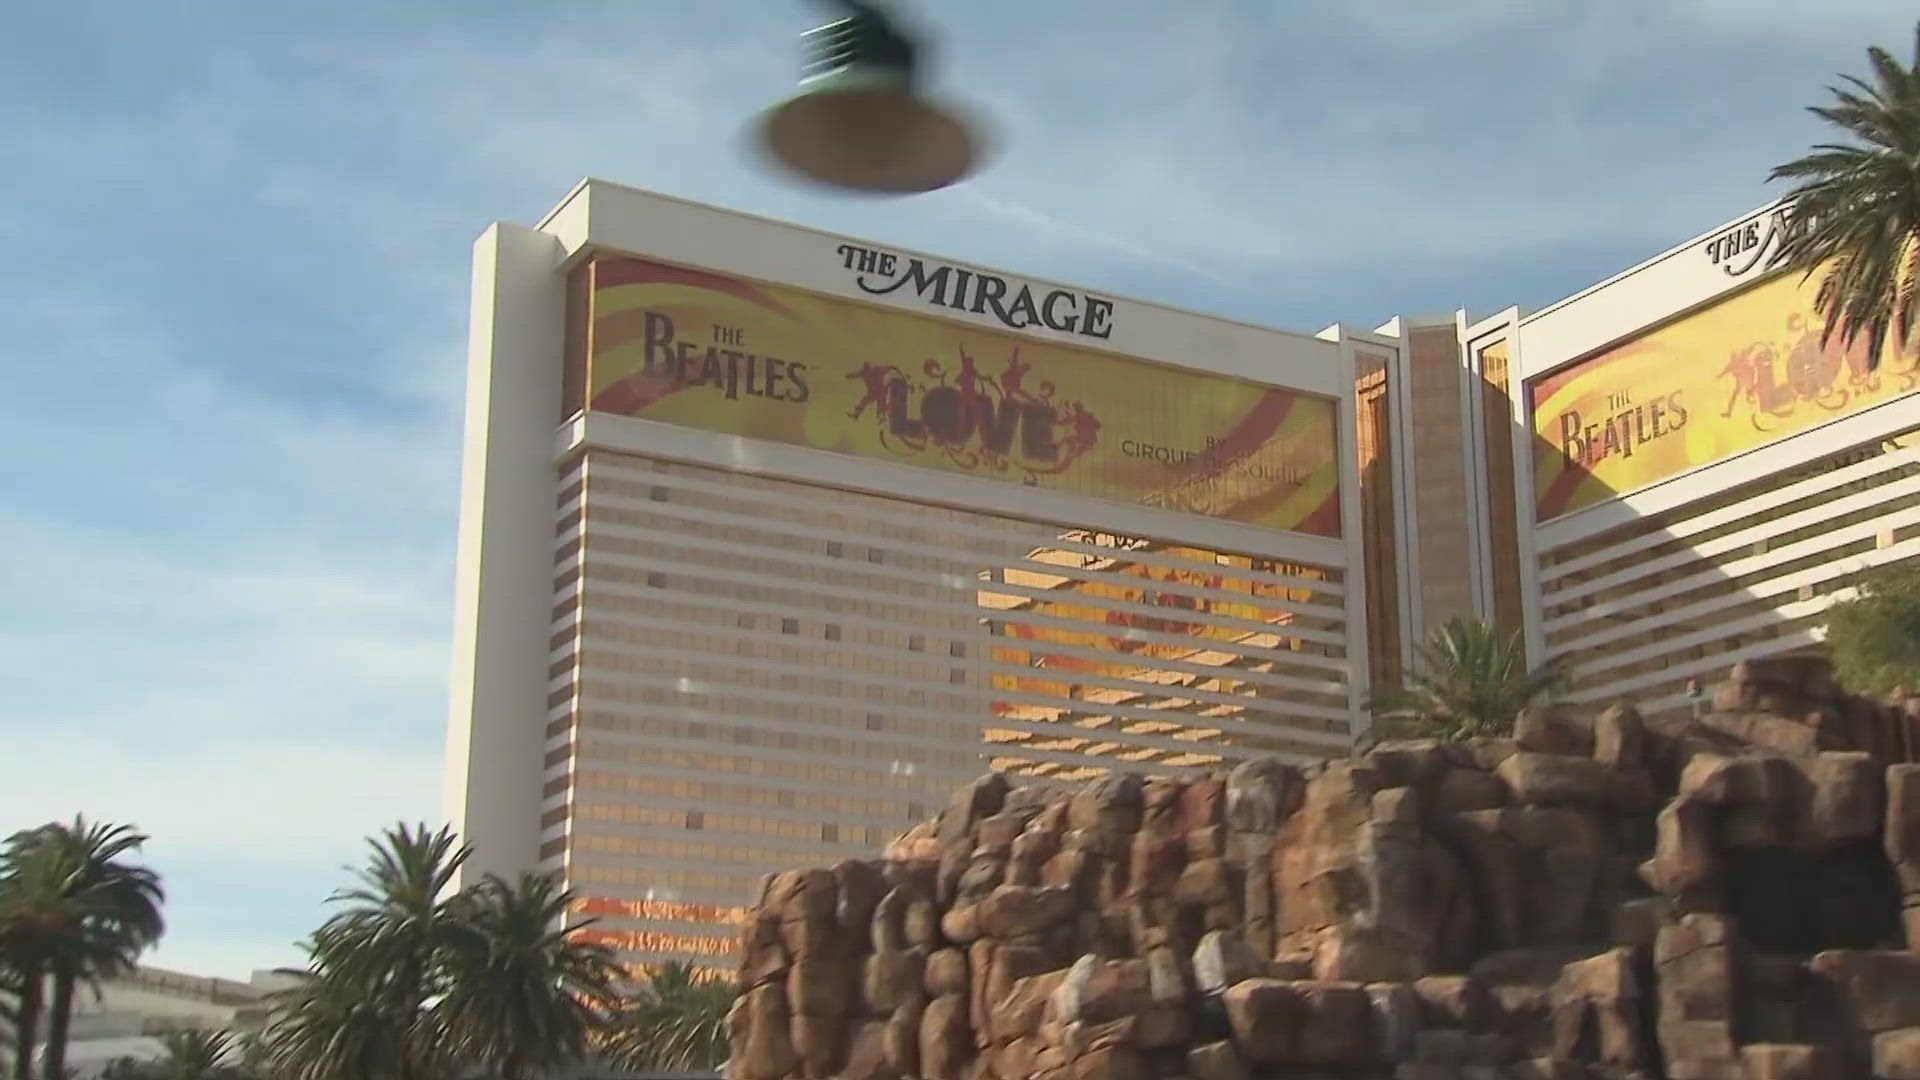 The Mirage, which has been in Vegas for 34 years, will shut its doors July 17th to start renovations. The Hard Rock is set to open in 2027.